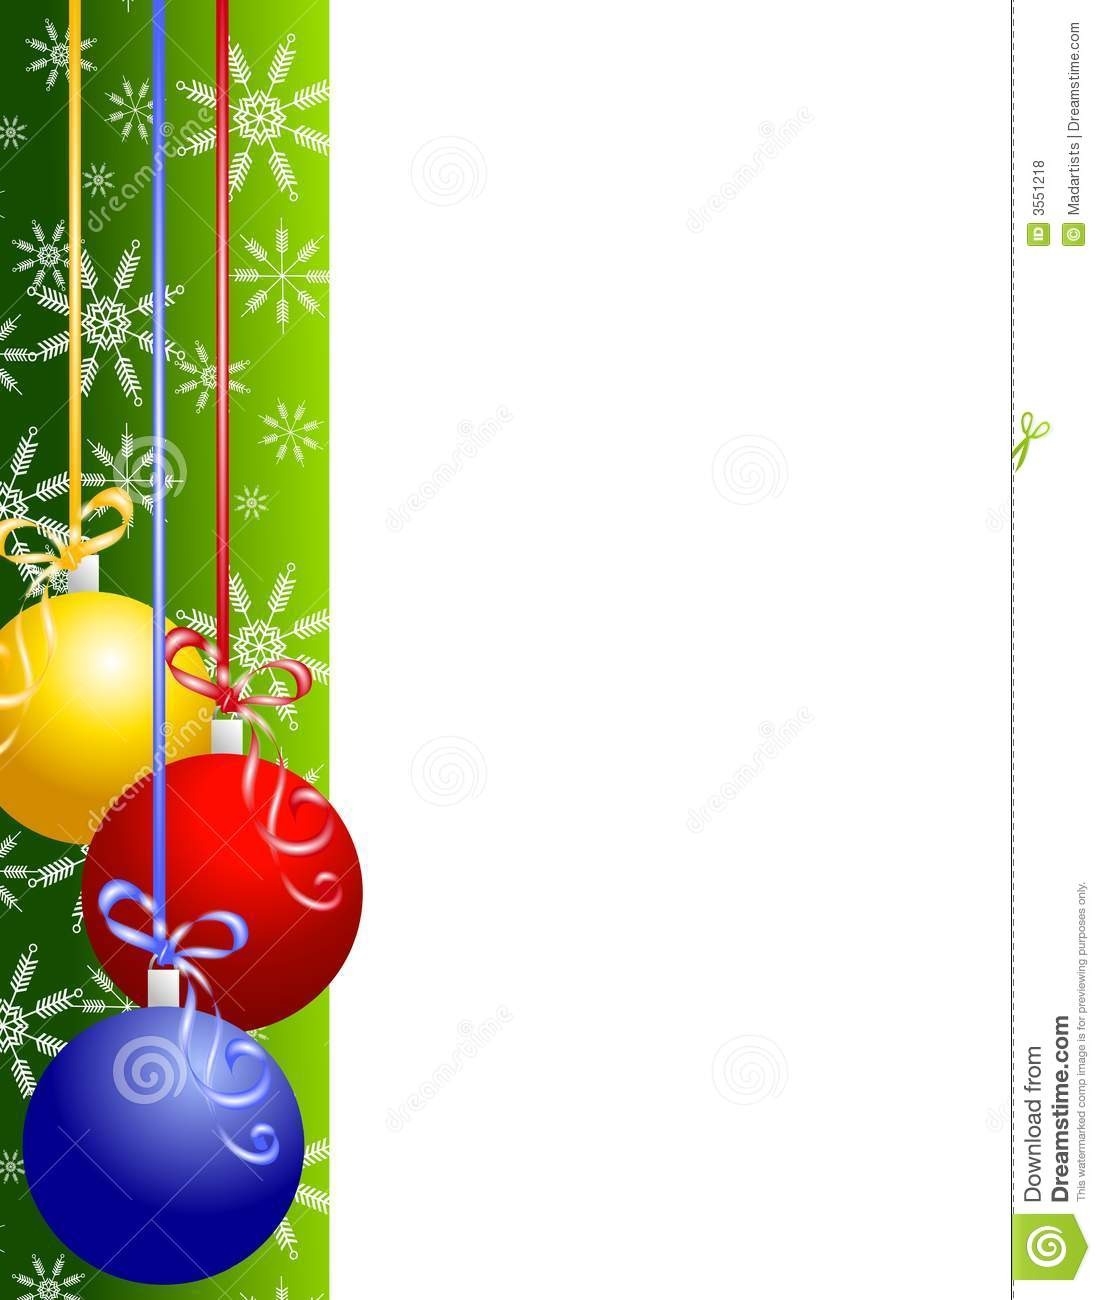 Christmas Clip Art Borders For Word Documents.